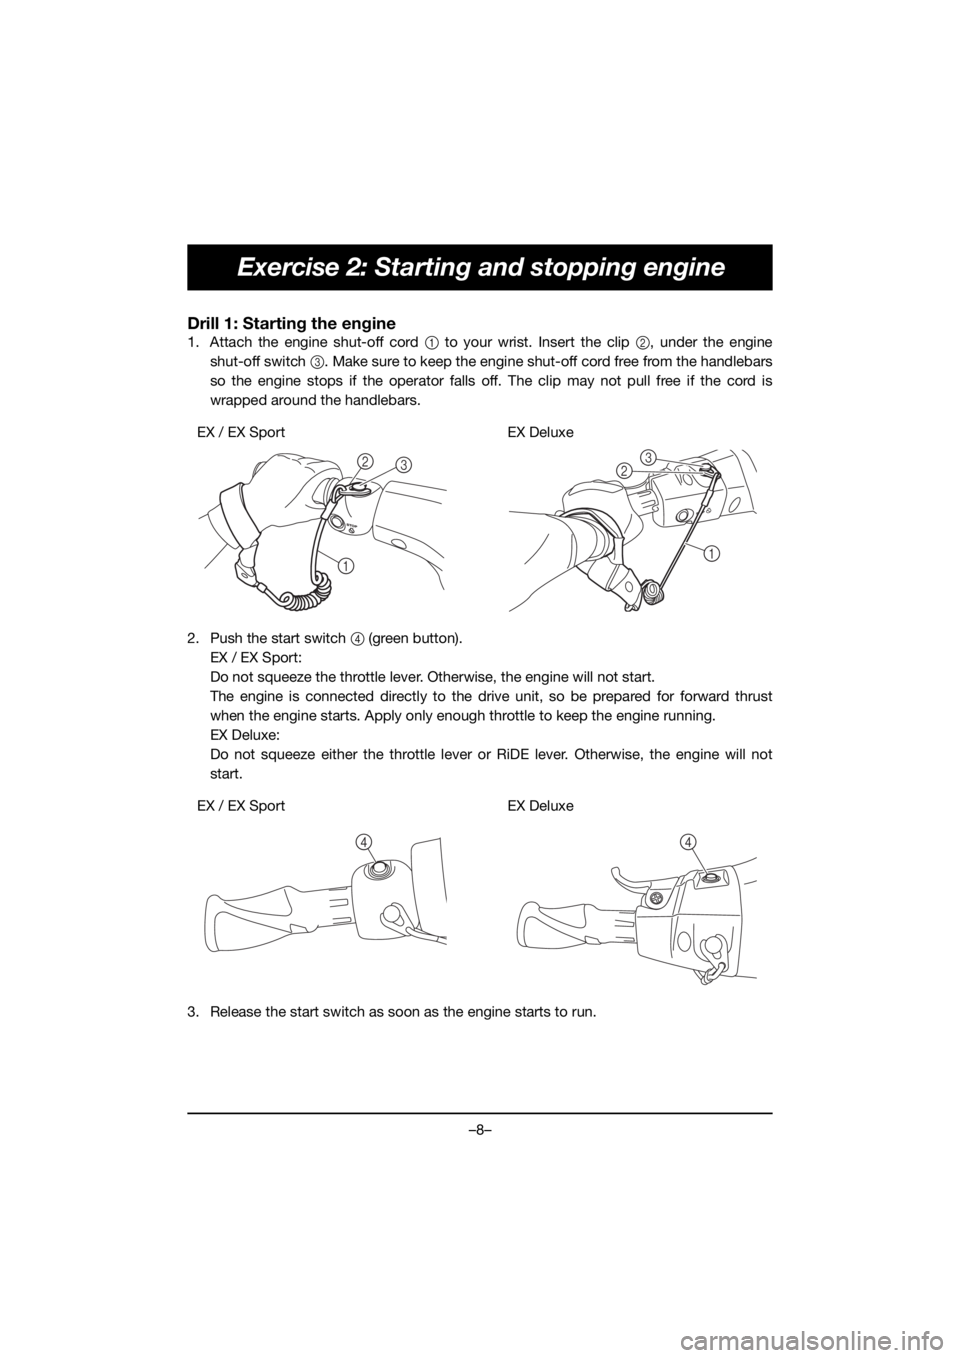 YAMAHA EX SPORT 2019  ΟΔΗΓΌΣ ΧΡΉΣΗΣ (in Greek) –8–
Exercise 2: Starting and stopping engine
Drill 1: Starting the engine
1. Attach the engine shut-off cord 1 to your wrist. Insert the clip 2, under the engine
shut-off switch 3. Make sure to ke